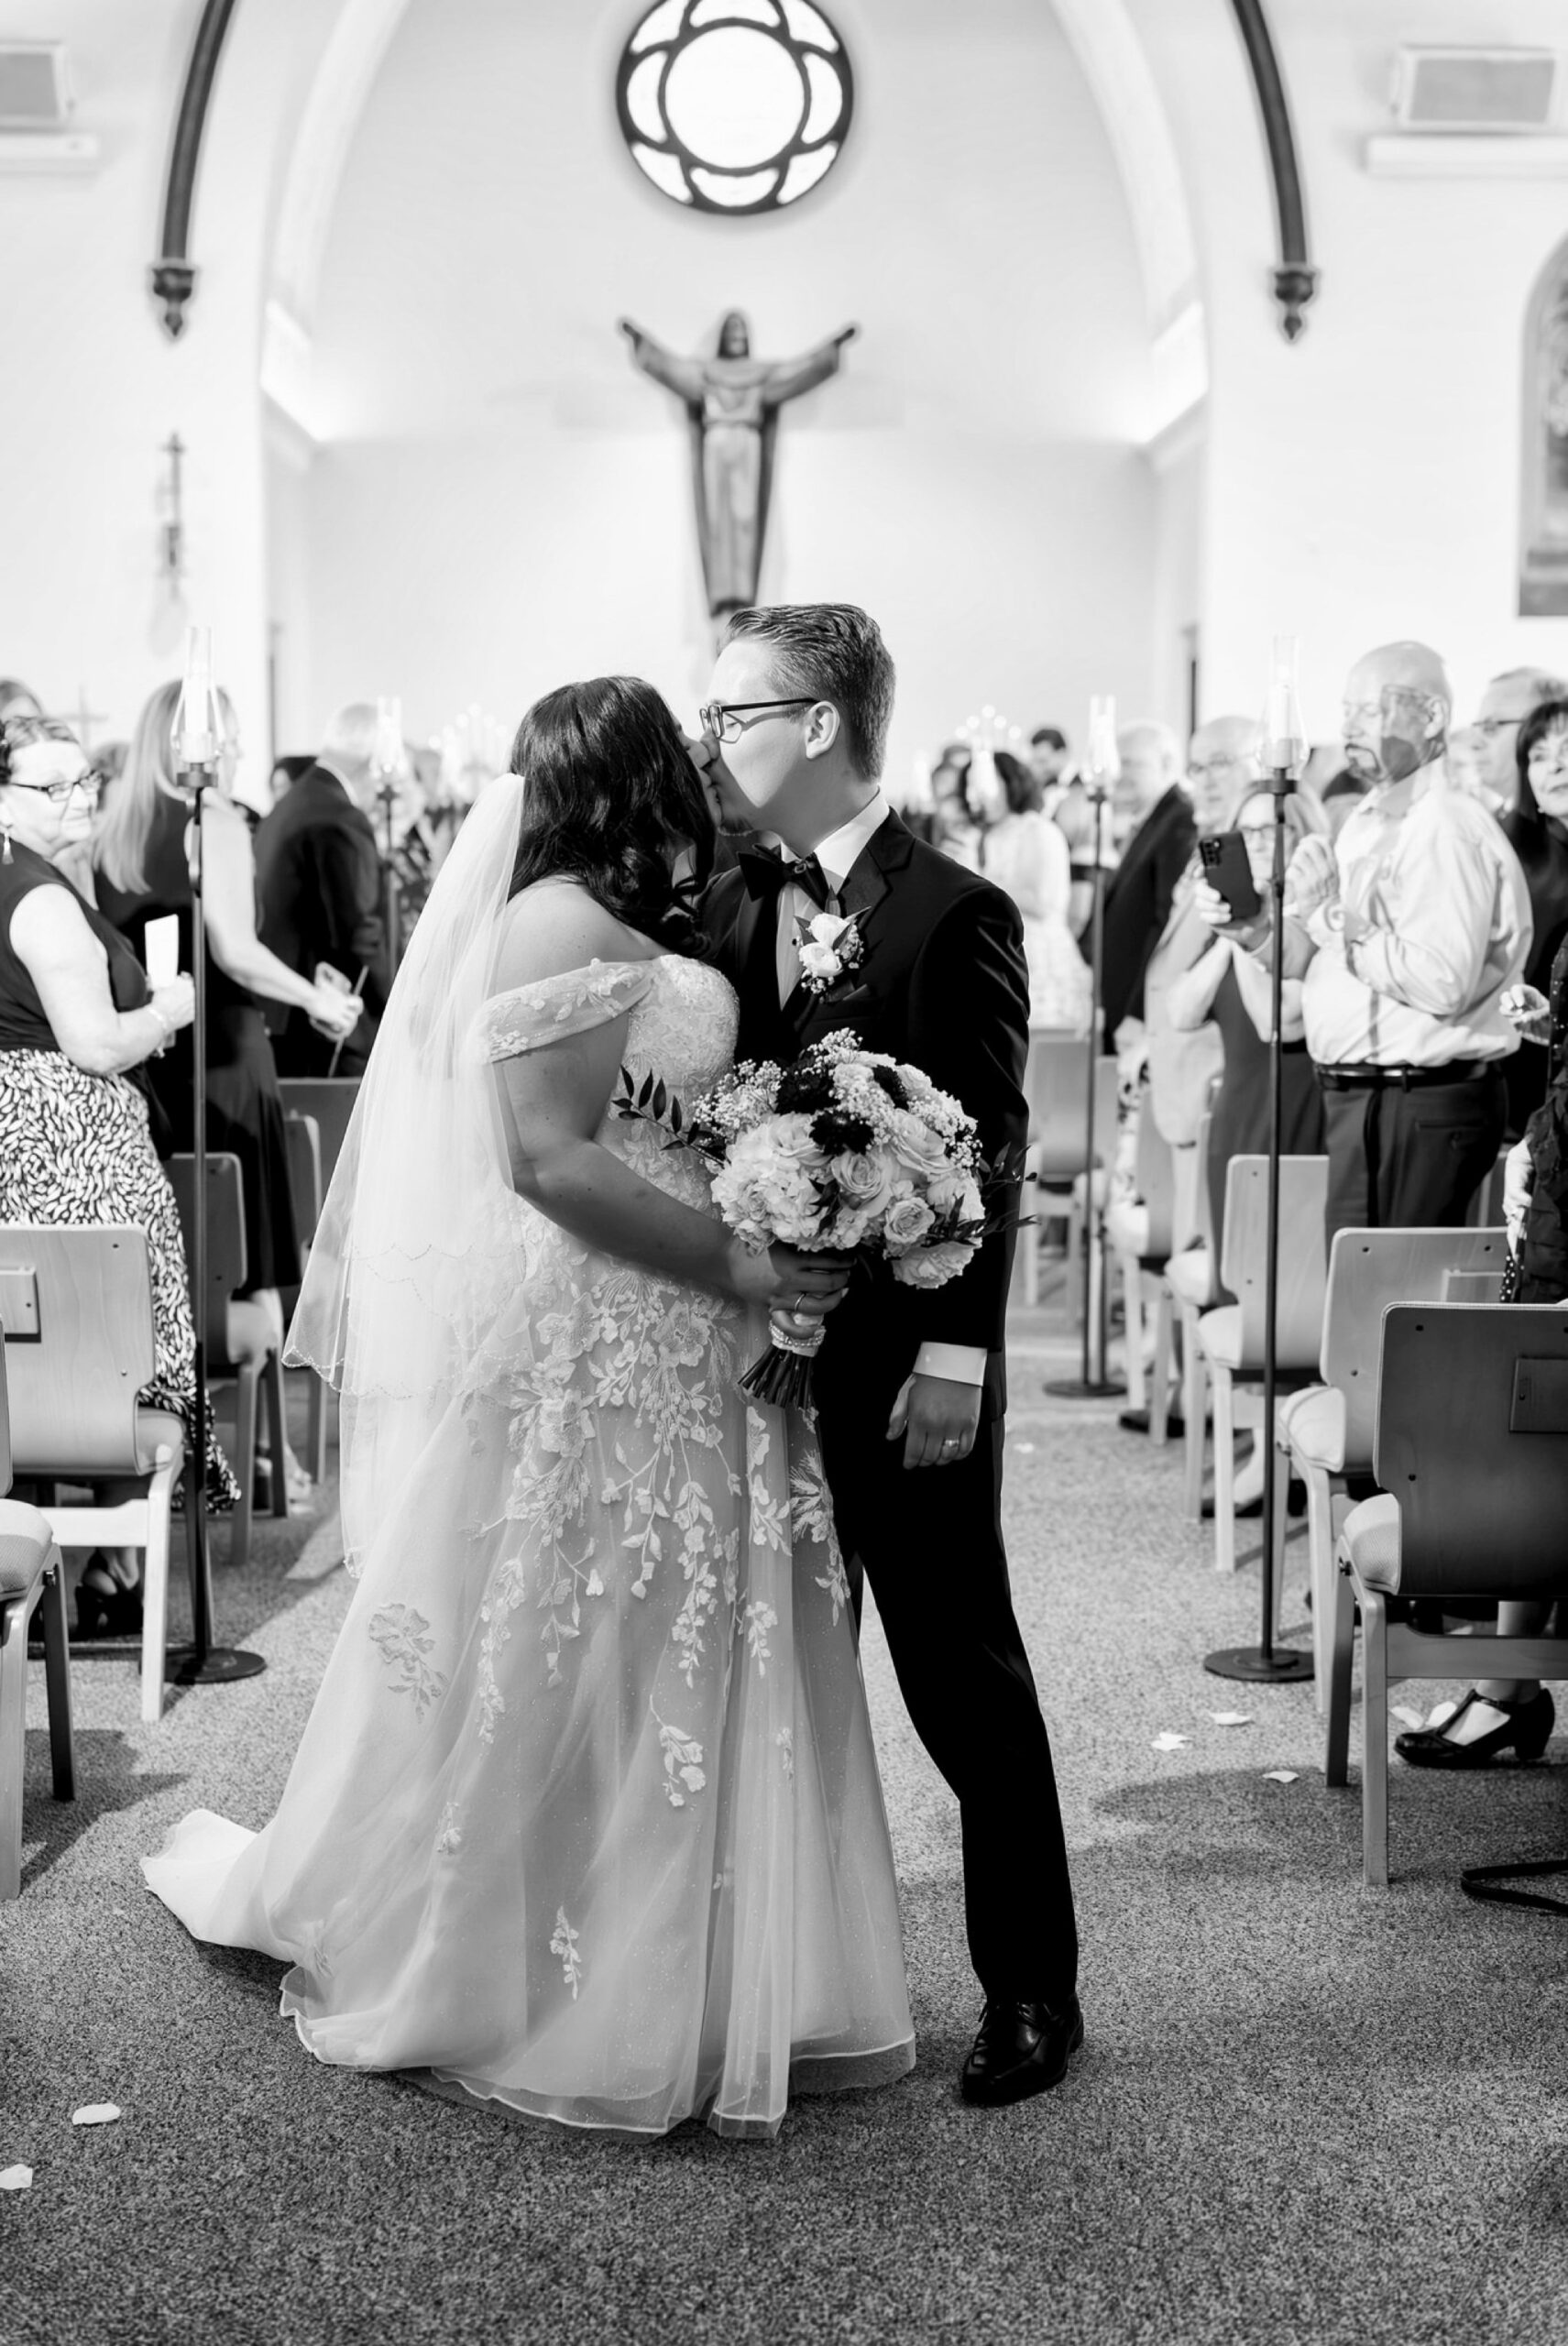 The bride and groom walk down the aisle on their wedding day at Immanuel Lutheran Church in Macomb, MI. 